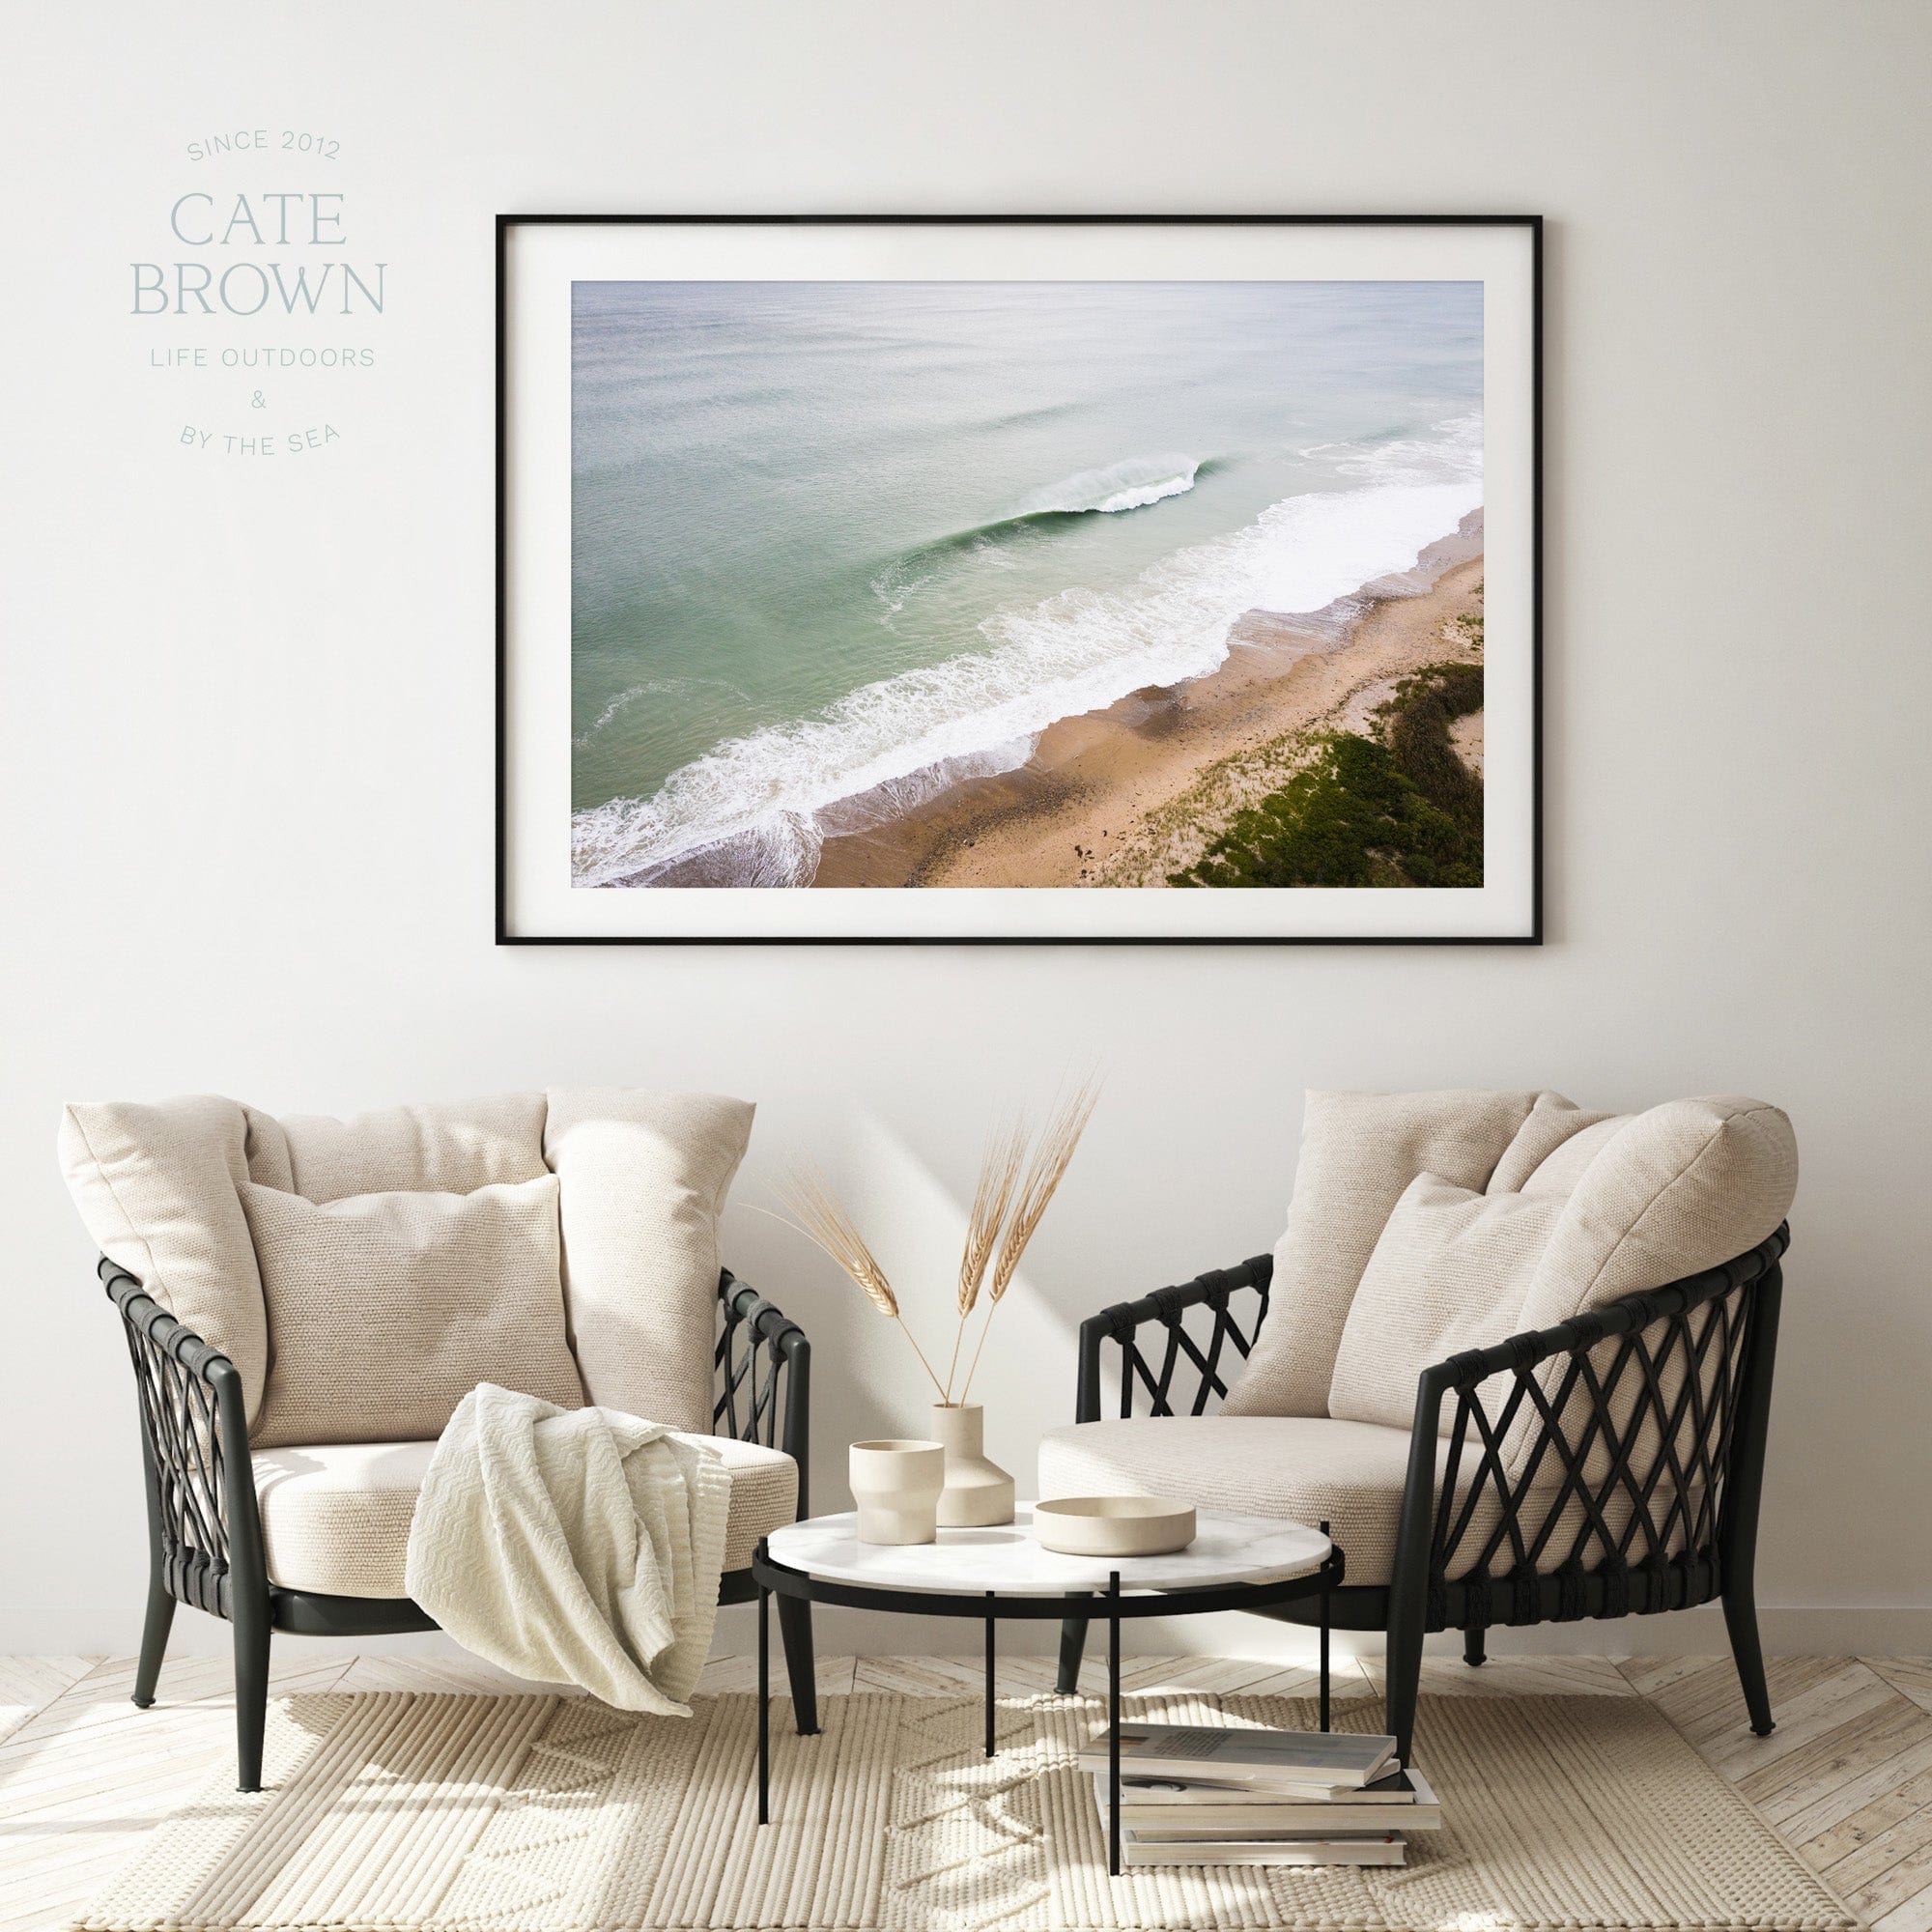 Cate Brown Photo Fine Art Print / 8"x12" / None (Print Only) Ocean View from Moonstone #4  //  Aerial Photography Made to Order Ocean Fine Art